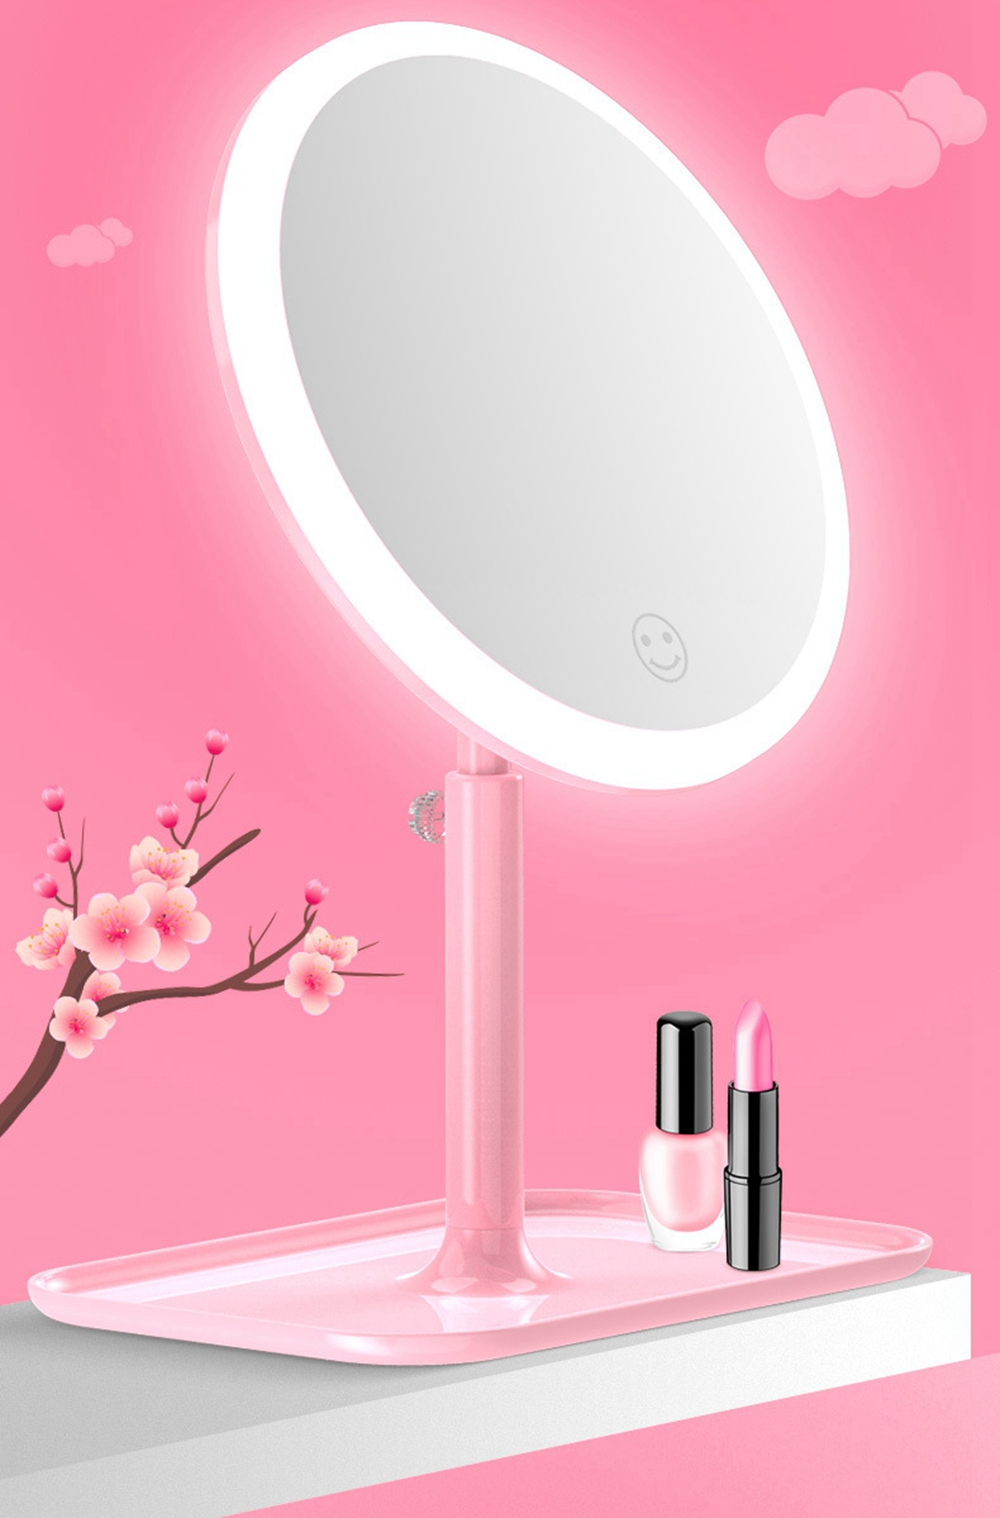 Portable-Flexible-USB-Makeup-Mirror-LED-Light-Touch-Dimmable-Storage-Base-1542583-1